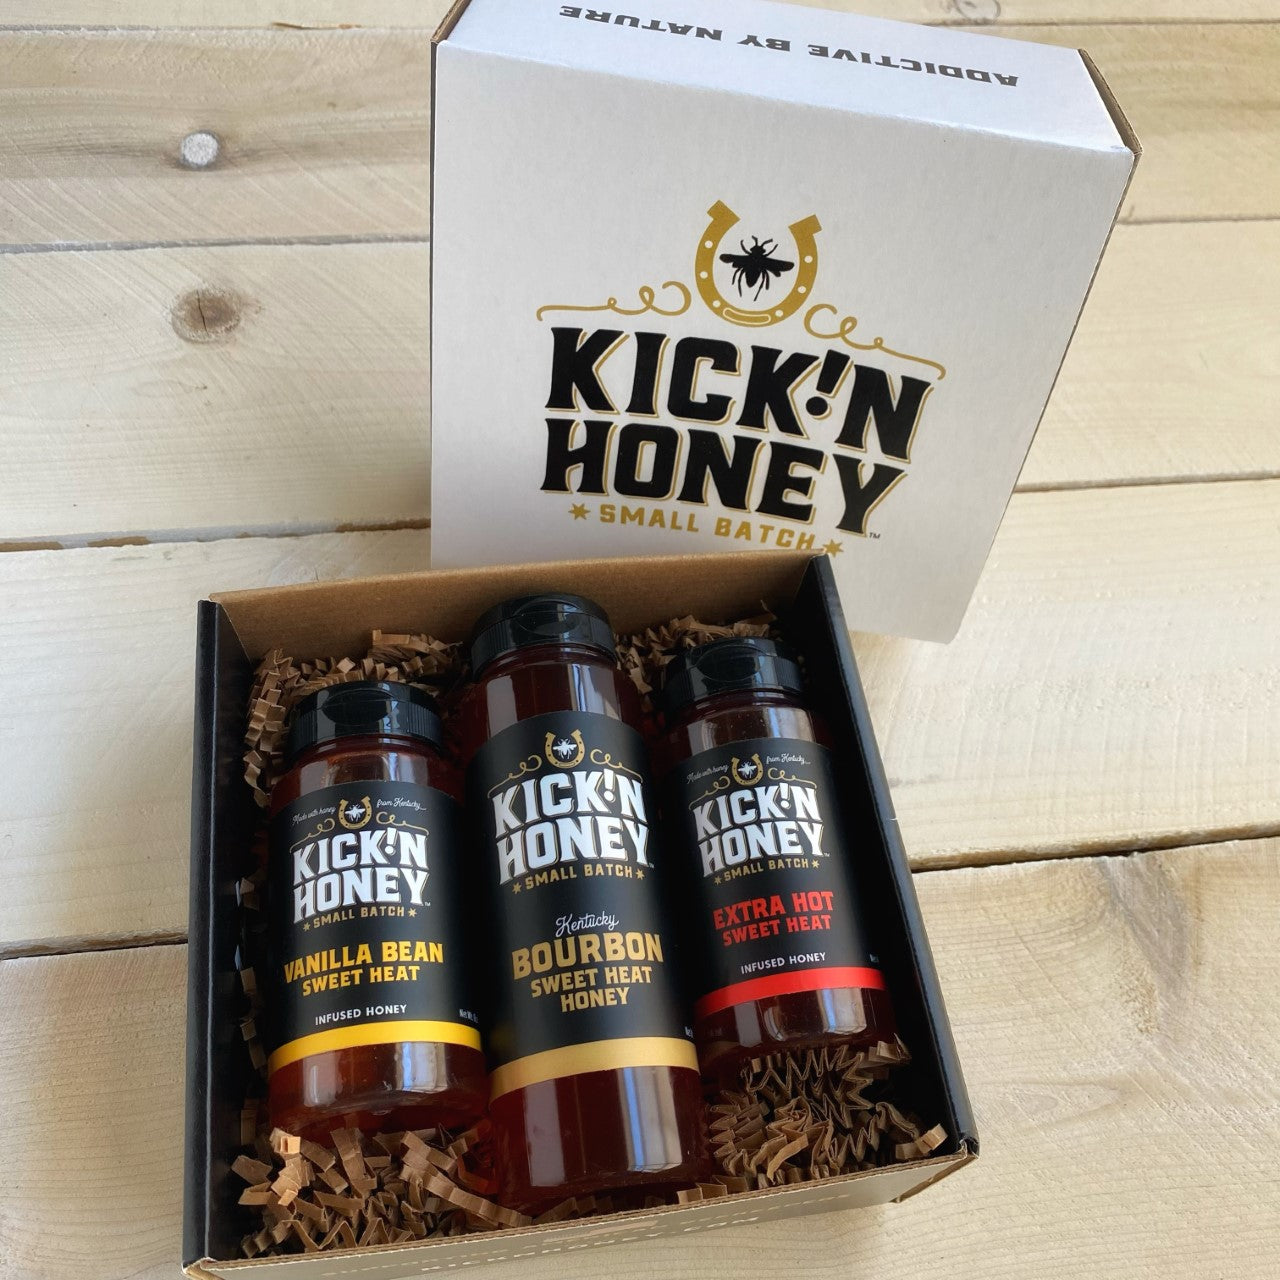 Our Kentucky Bourbon Hot Honey gift box is perfect for the bourbon lover. It features a 12oz. bottle of Kick'n Honey, Bourbon hot honey, plus an bottle of Vanilla Bean Hot Honey and Extra Hot Honey. The gift box is nicely printed so it makes a great gift you can be proud of.